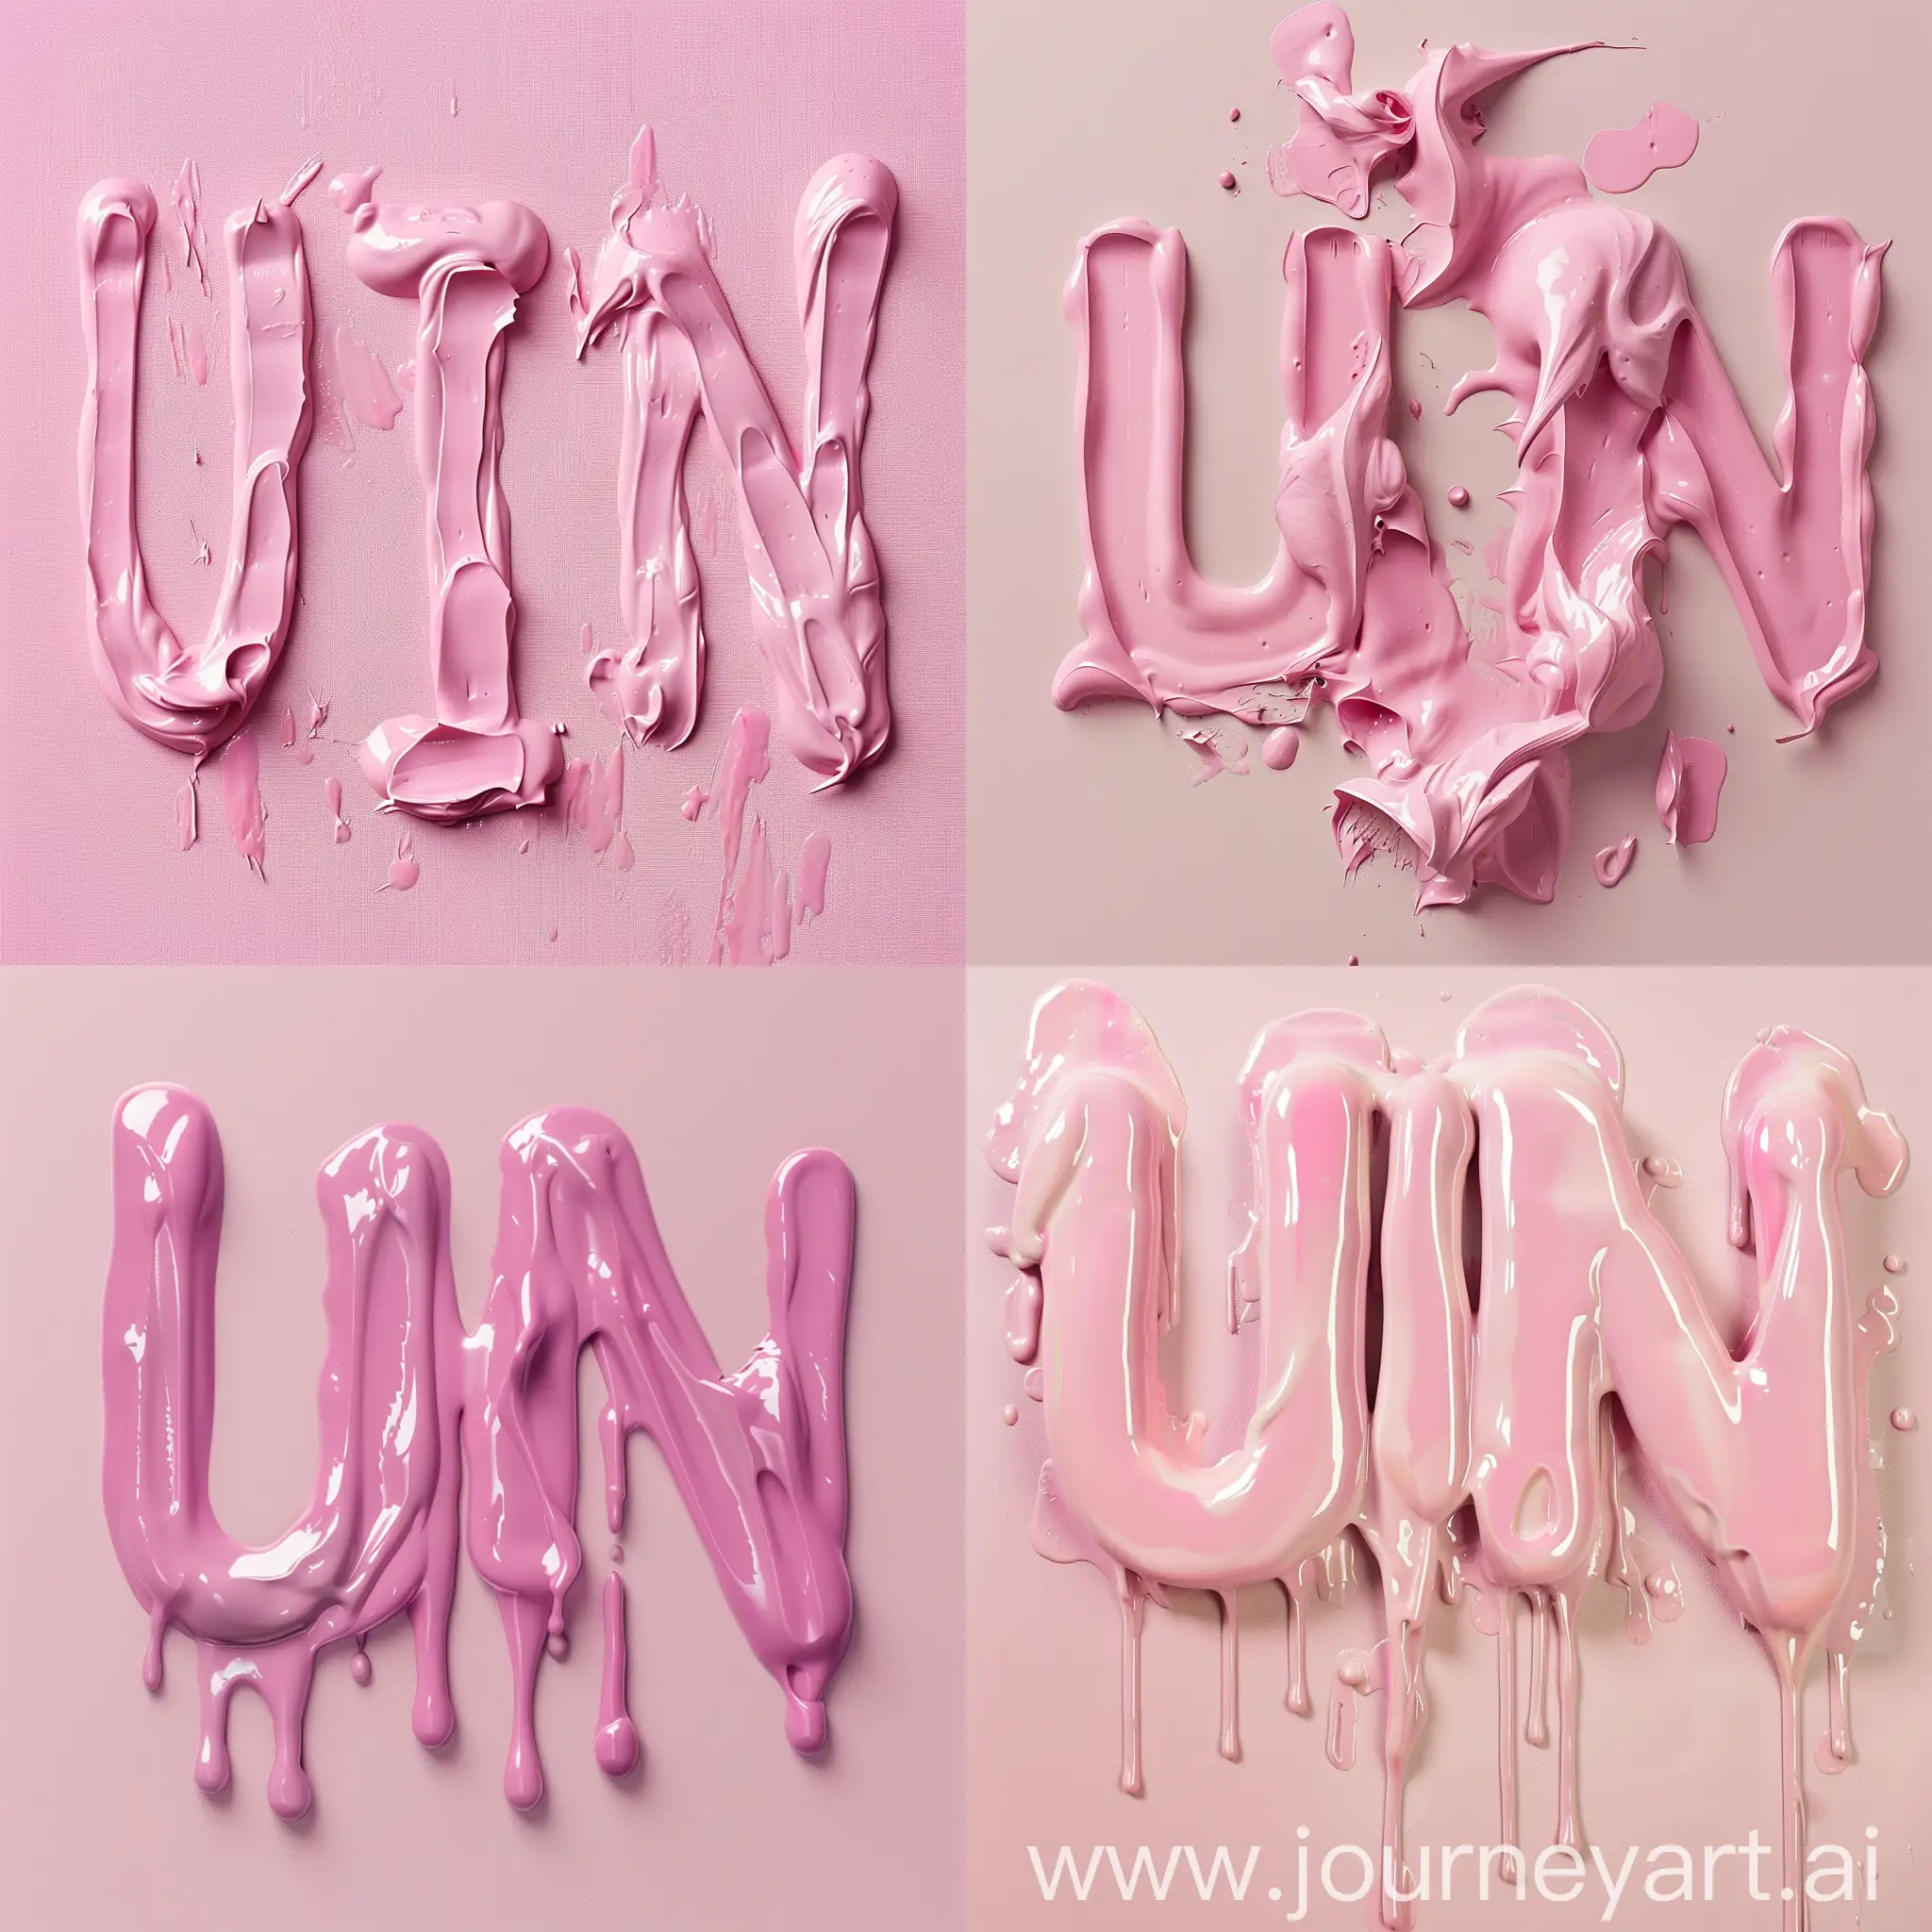 the letters UNI are located on a light pink background, along which light pink paint flows